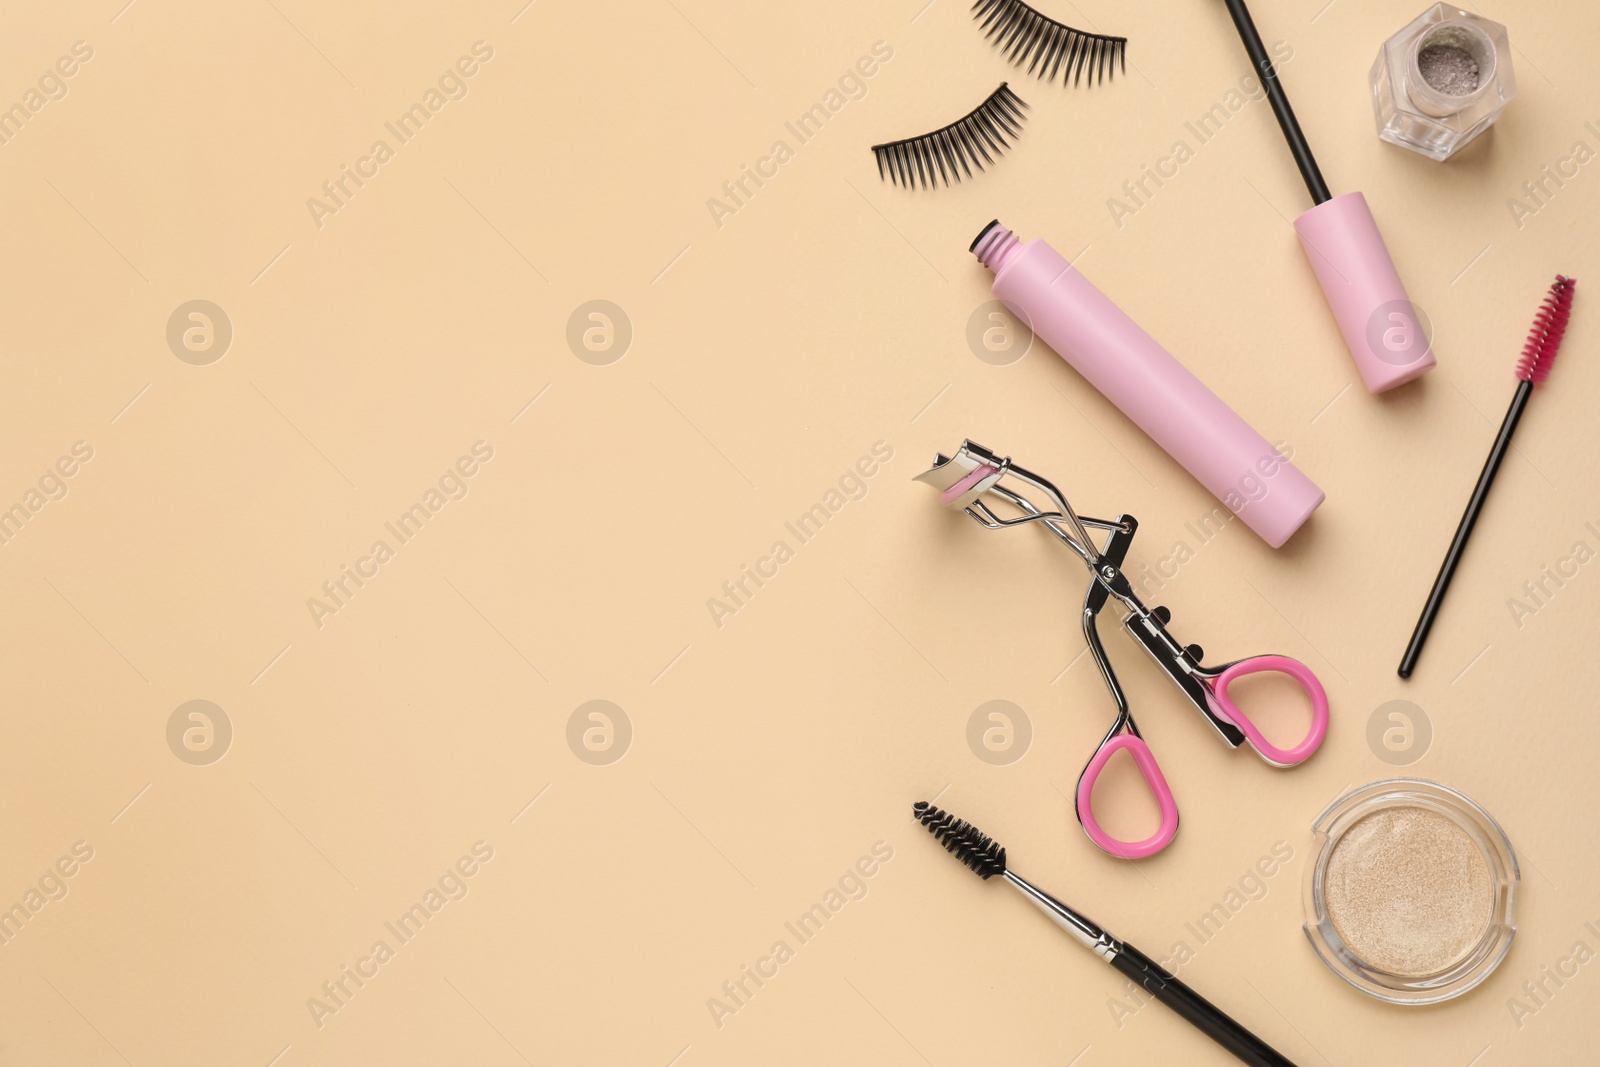 Photo of Flat lay composition with eyelash curler, makeup products and accessories on beige background. Space for text